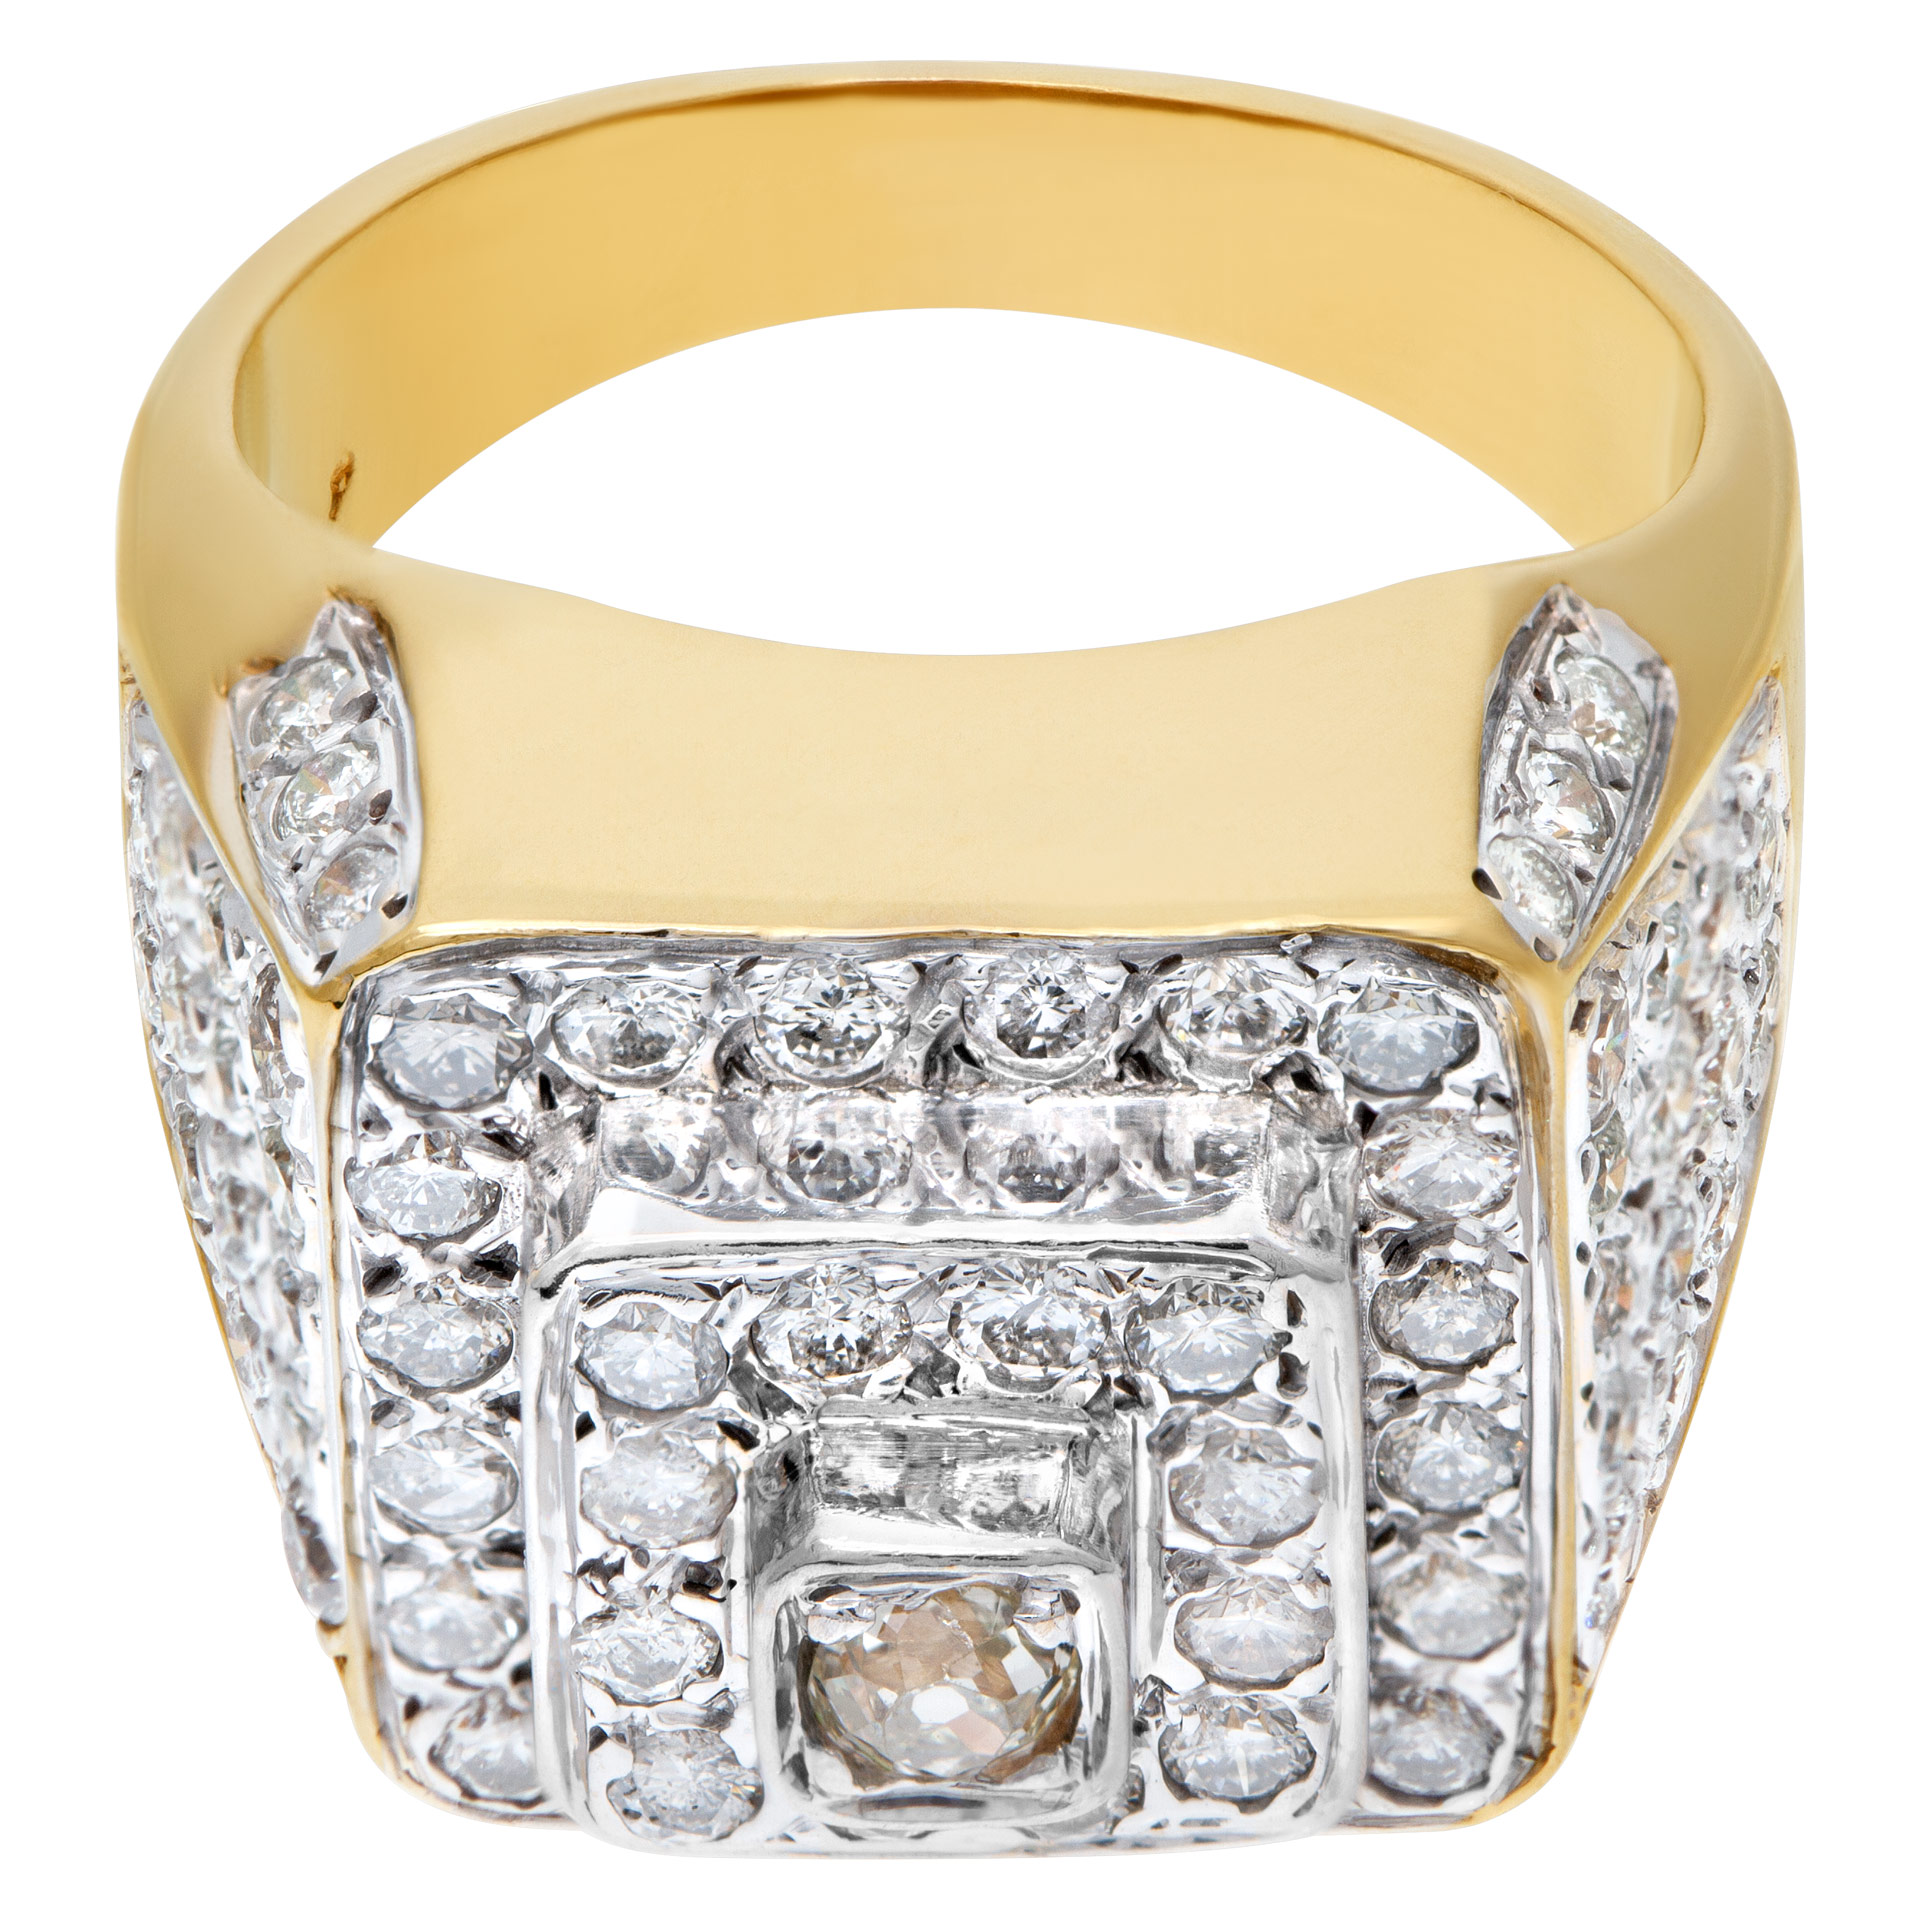 Mens diamond ring in 14k white and yellow gold